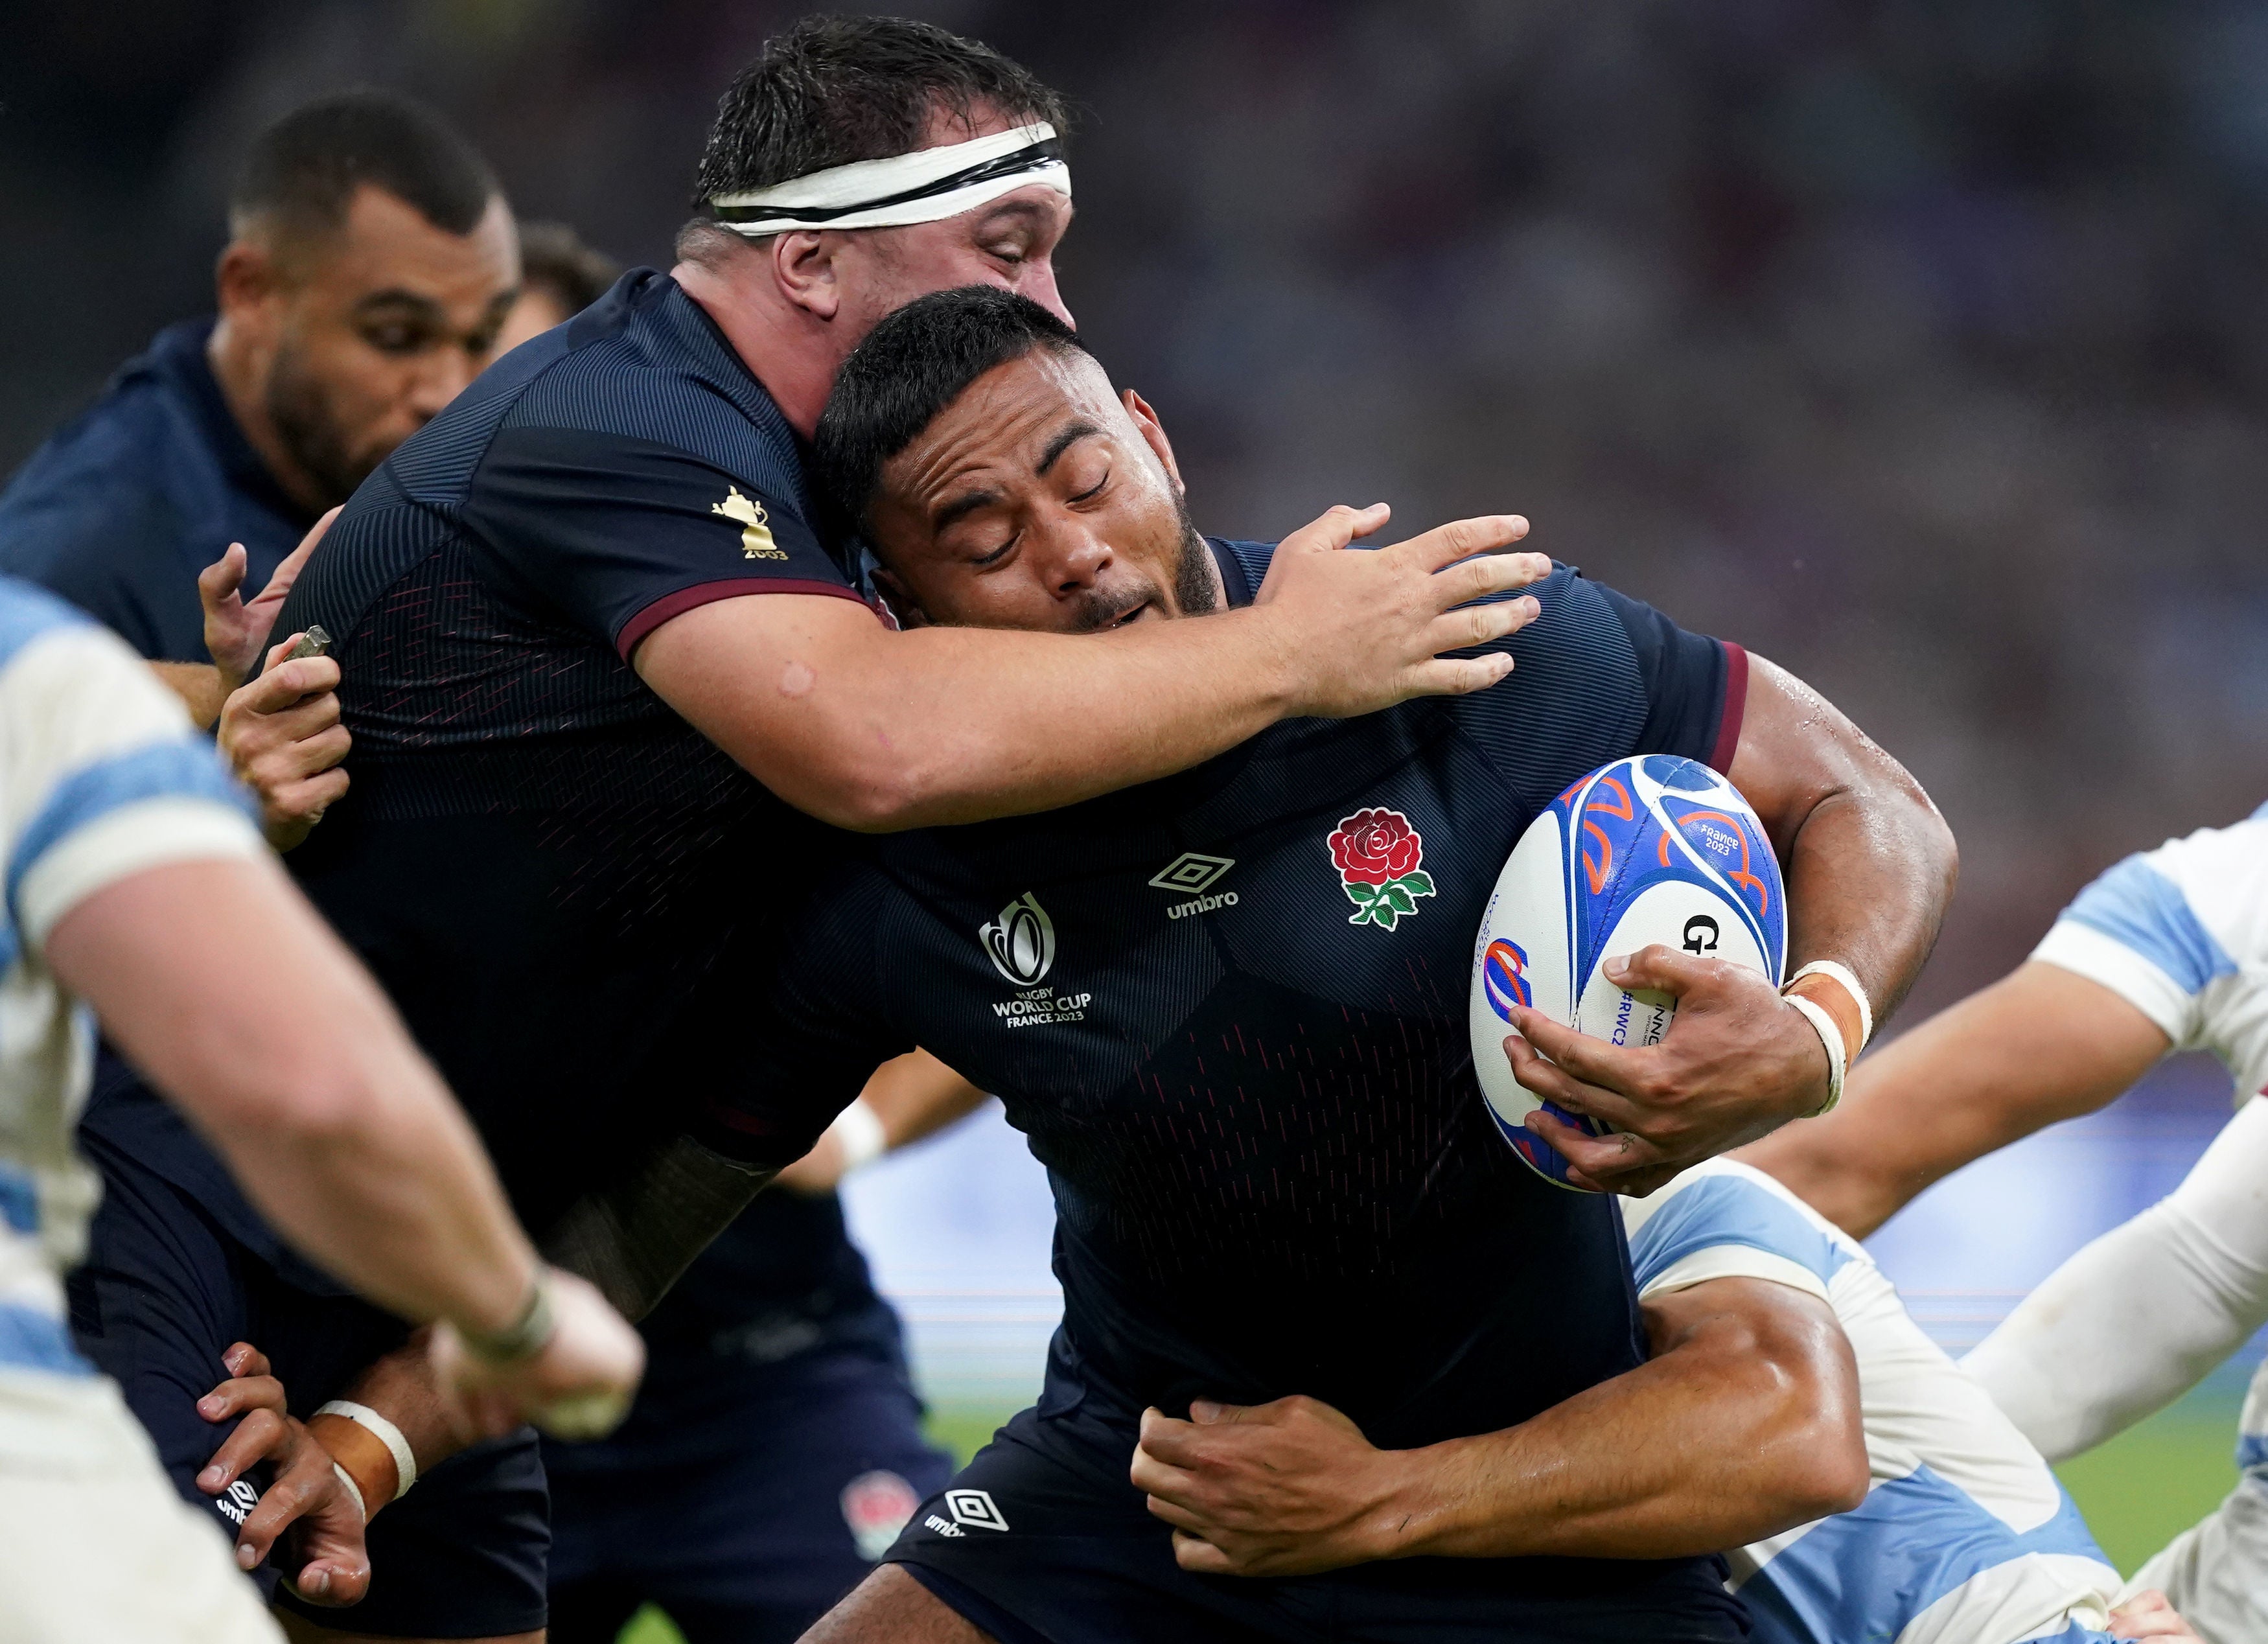 Manu Tuilagi’s powerful running has been a weapon for England for more than a decade